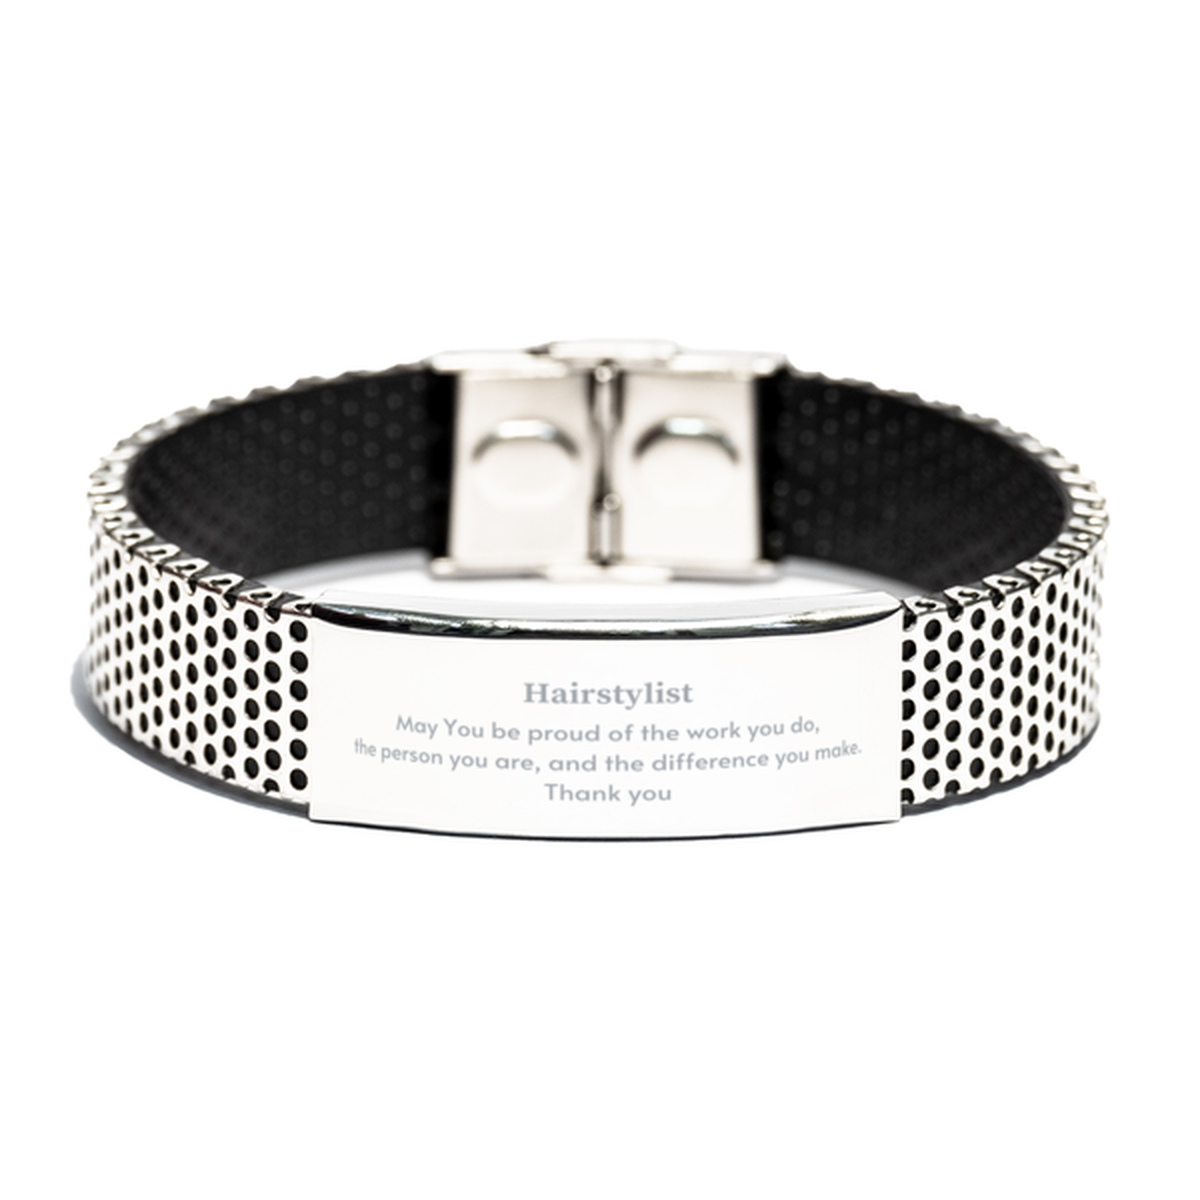 Heartwarming Stainless Steel Bracelet Retirement Coworkers Gifts for Hairstylist, Hairstylist May You be proud of the work you do, the person you are Gifts for Boss Men Women Friends